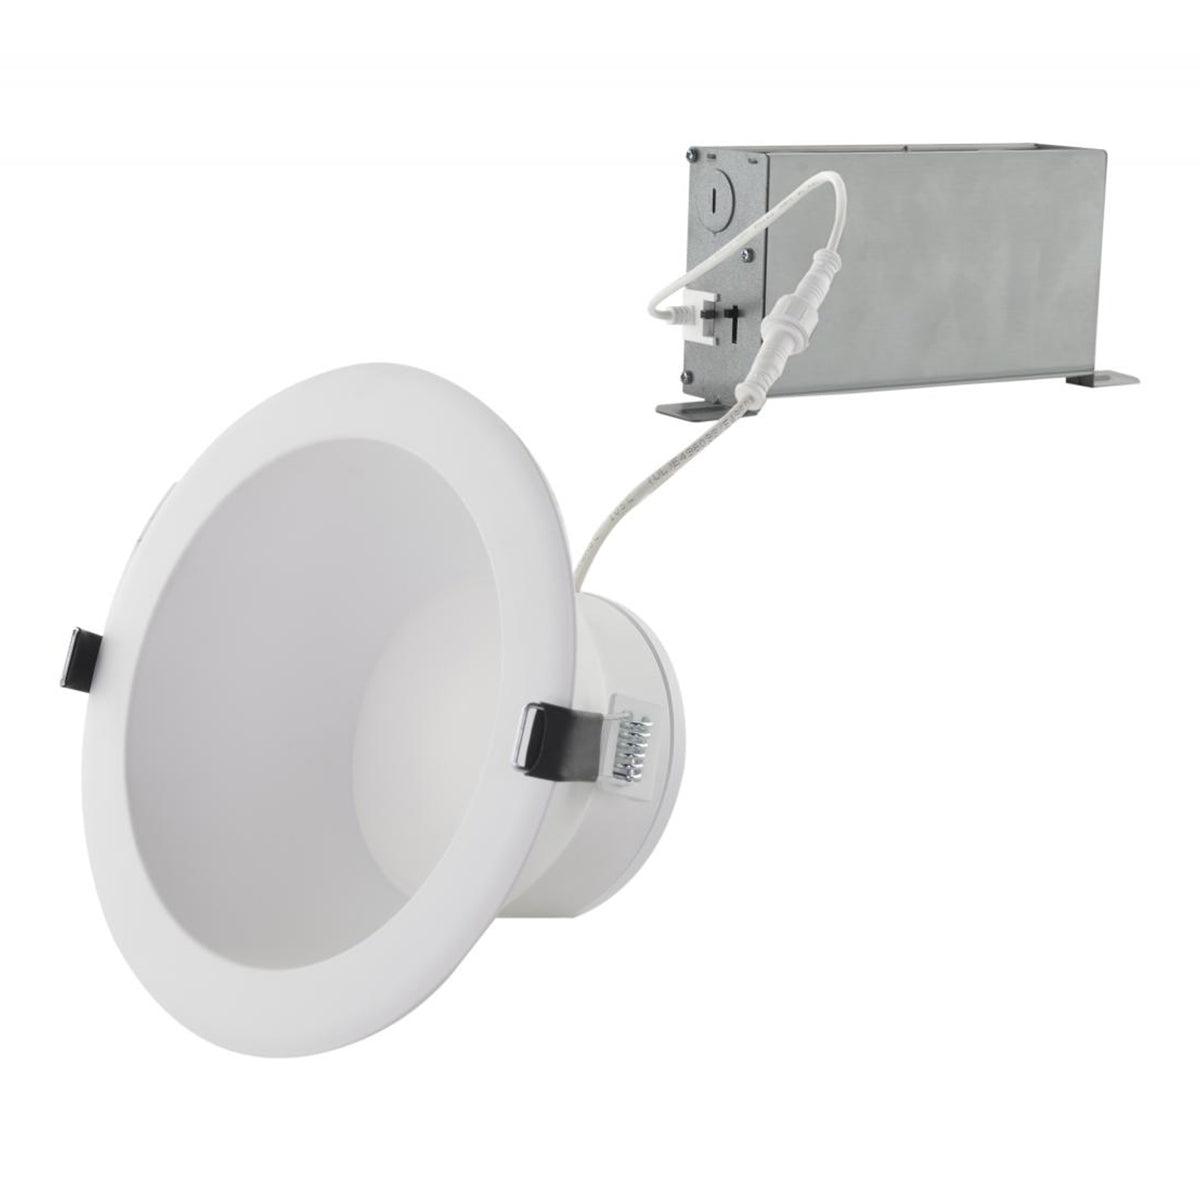 10 In. Commercial Canless LED Recessed Light, 46 Watt, 3500 Lumens, Selectable CCT, 2700K to 5000K, White Finish